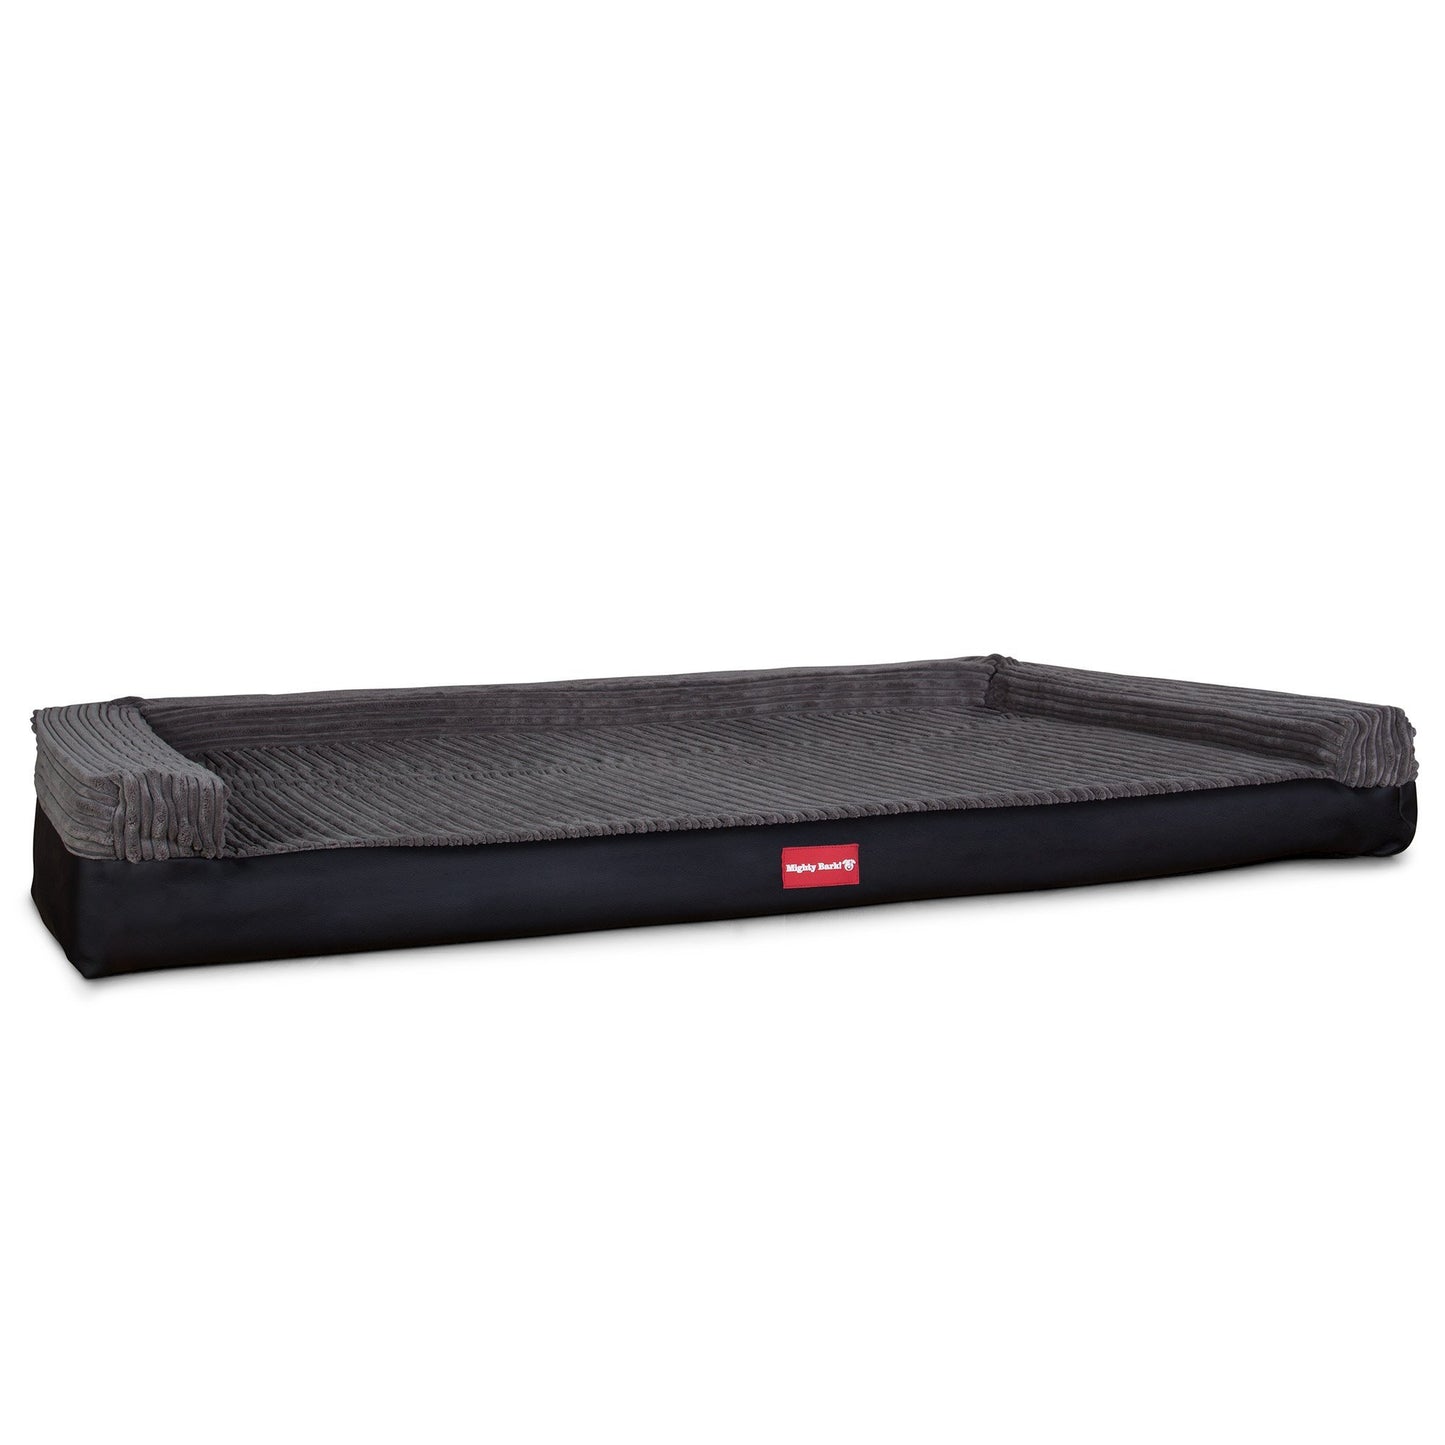 the-bench-orthopedic-memory-foam-dog-bed-faux-leather-black_5